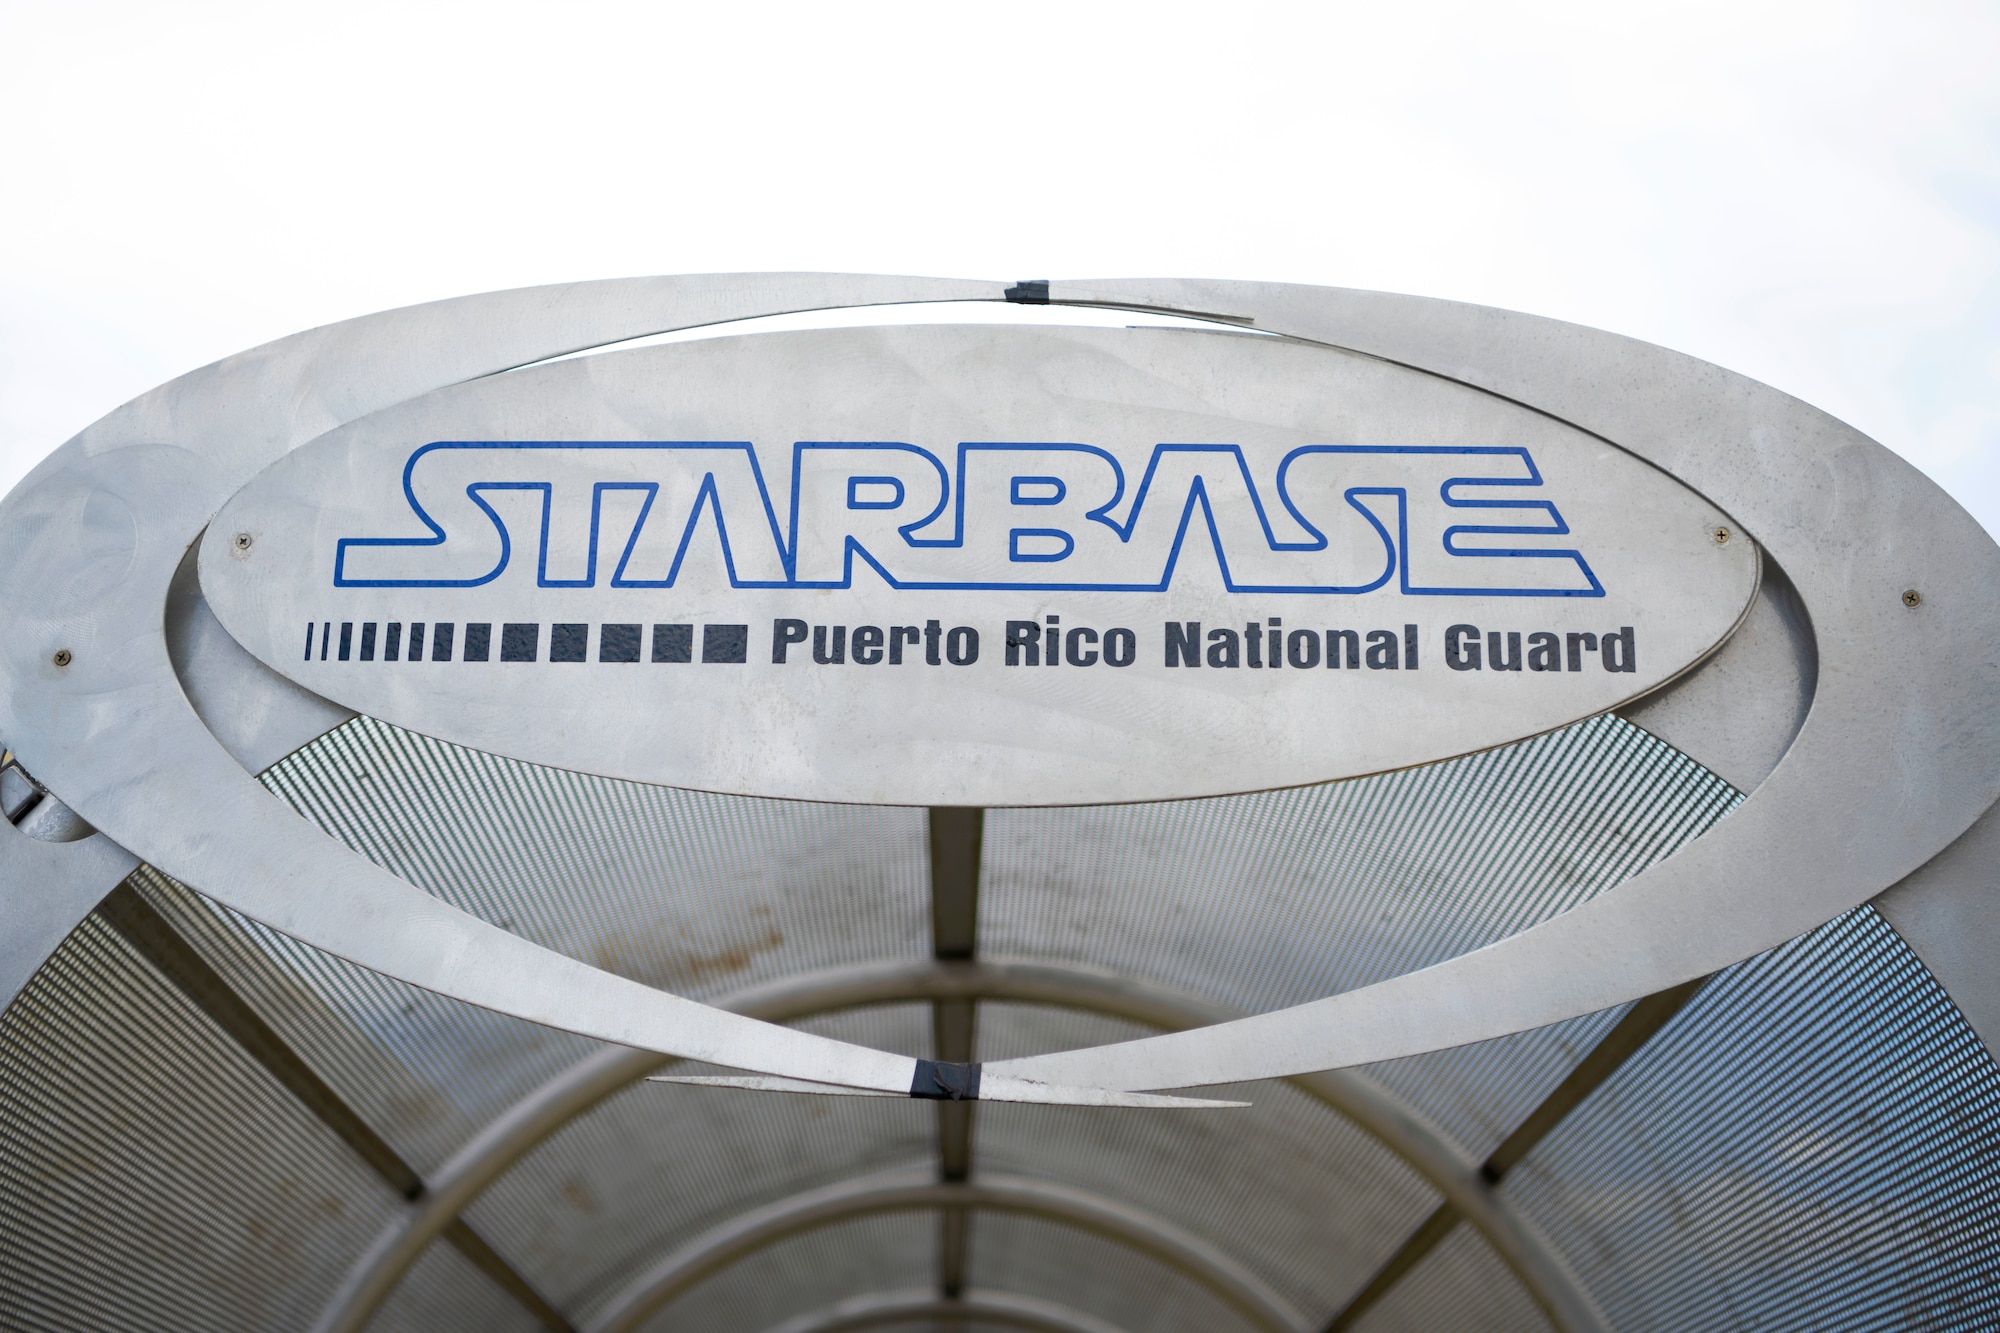 The STARBASE Puerto Rico logo at Muñiz Air National Guard Base, Carolina, Puerto Rico, May 22, 2023. The STARBASE PR program has enrolled and graduated more than 27,000 middle-school students through their science, technology, math, and engineering curriculum since 1995. (U.S. Air National Guard photo by Master Sgt. Rafael D. Rosa)